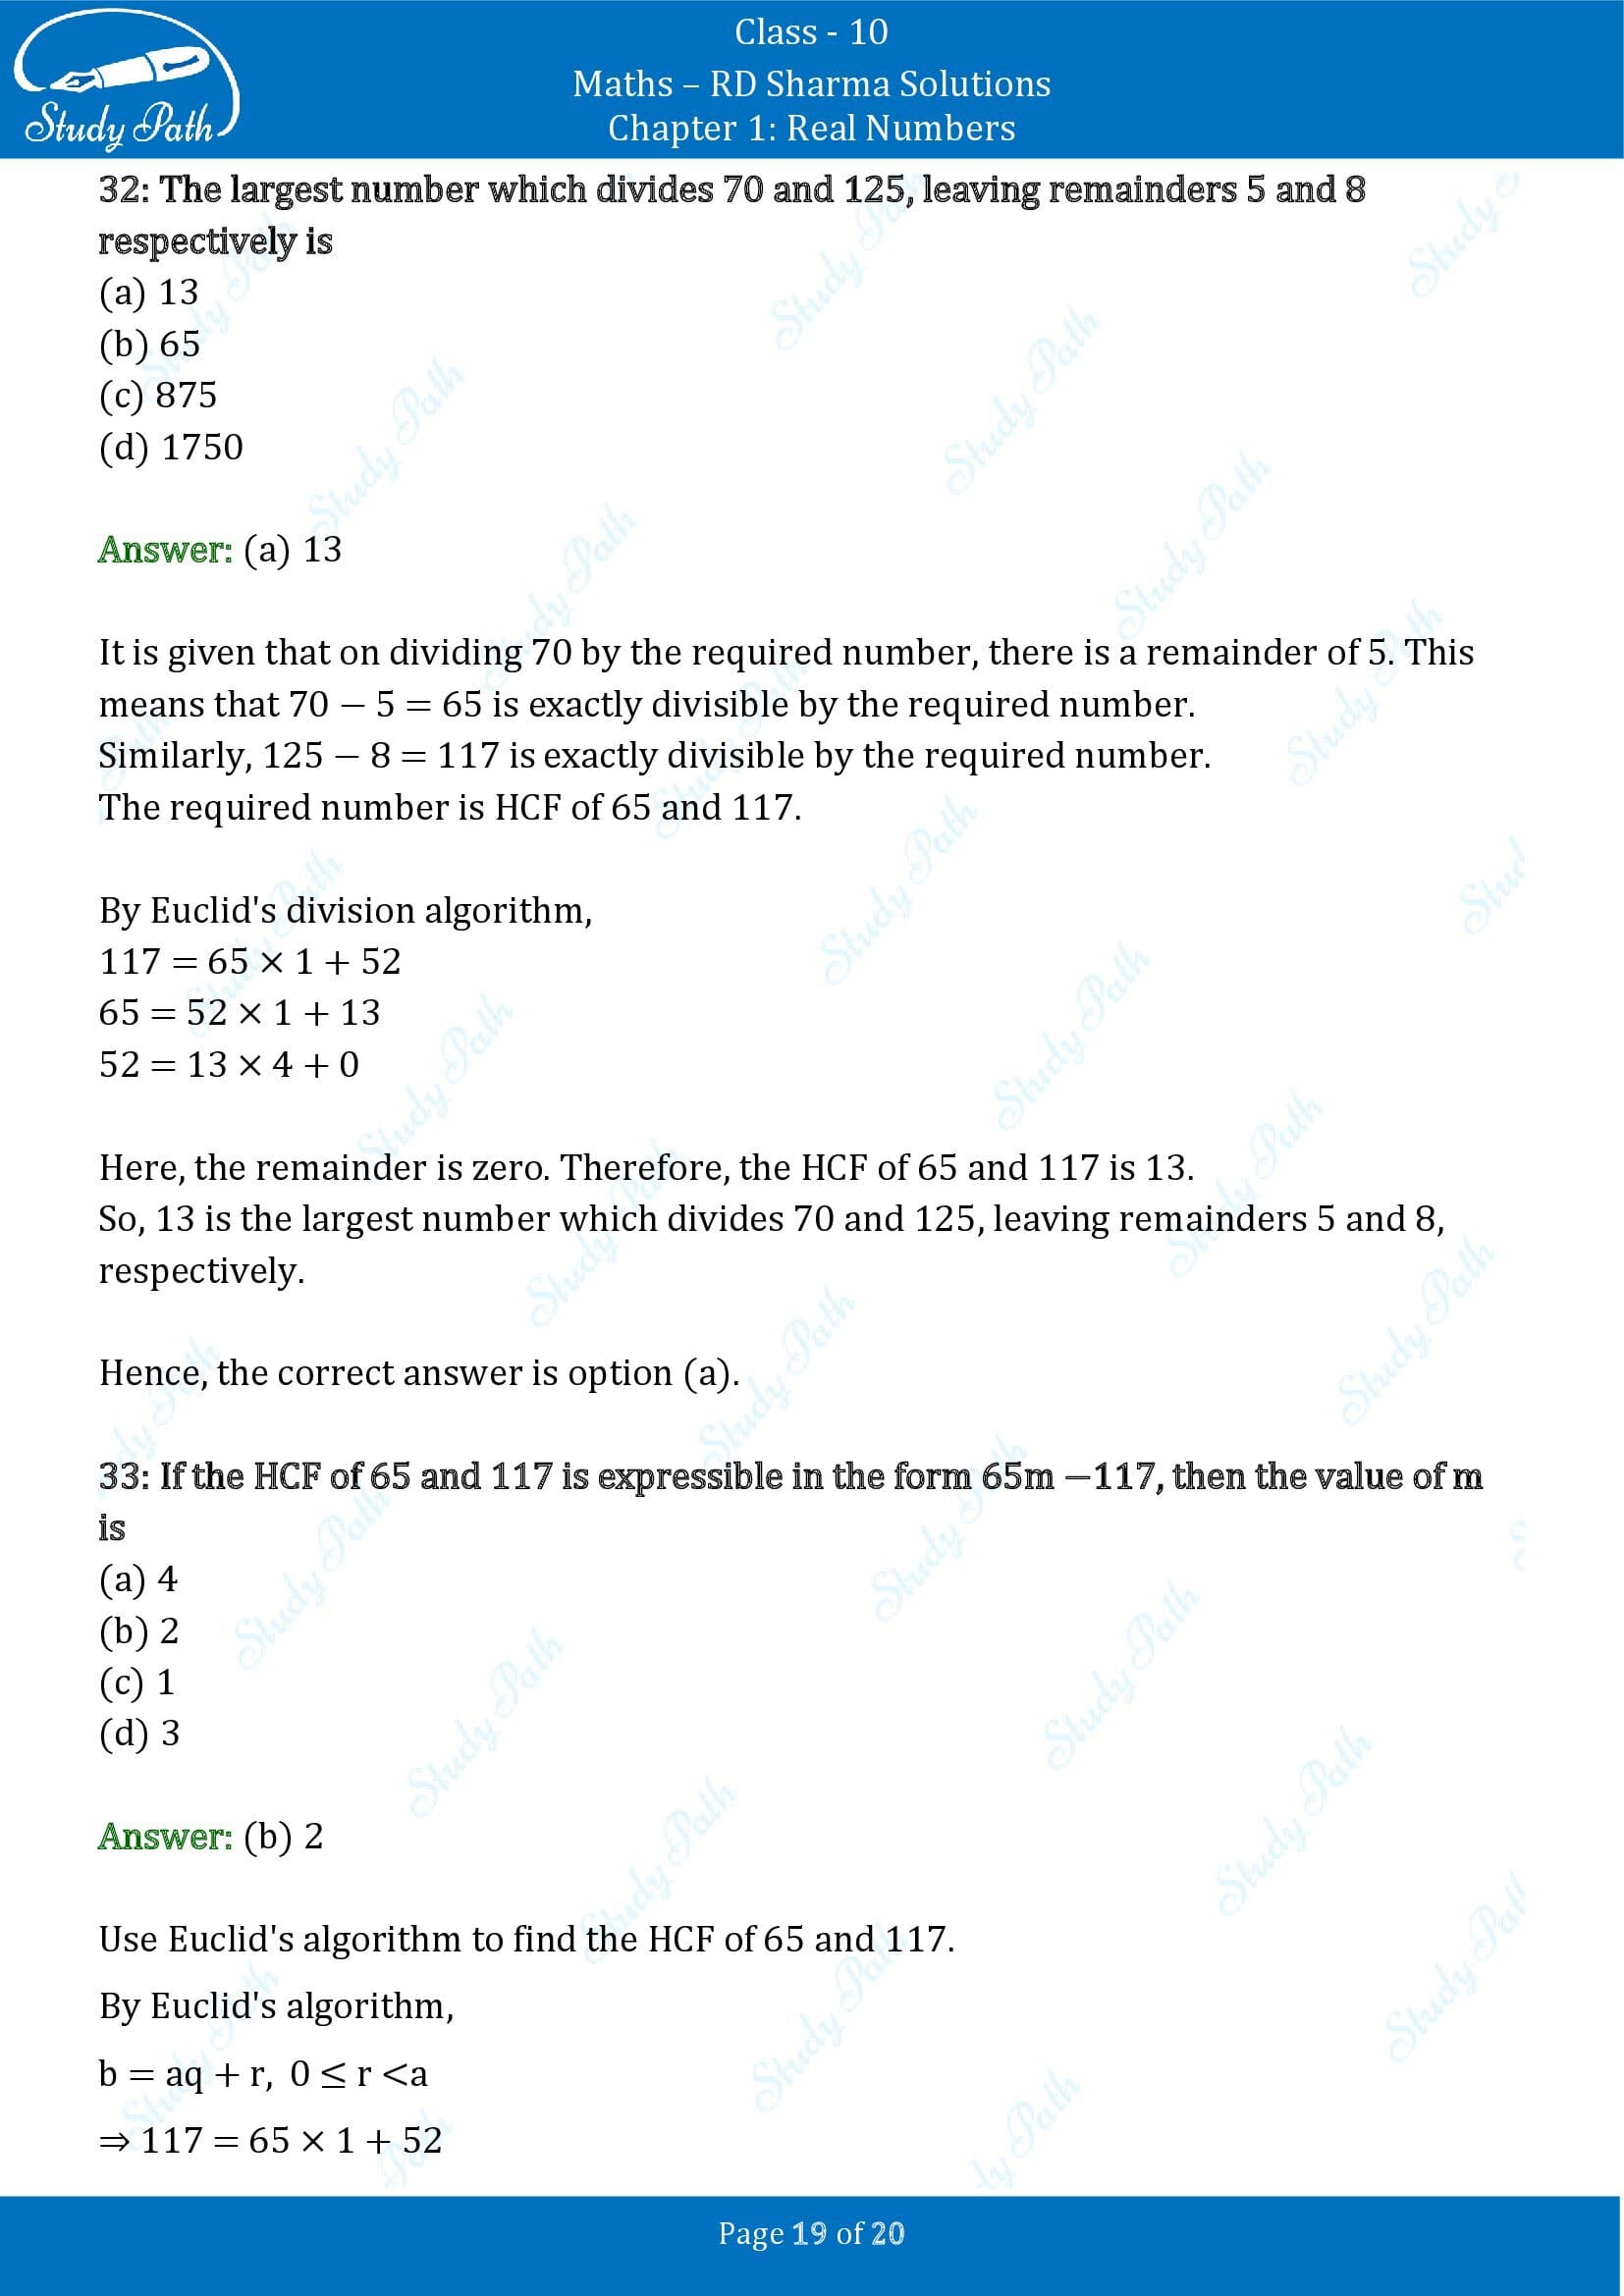 RD Sharma Solutions Class 10 Chapter 1 Real Numbers Multiple Choice Questions MCQs 00019